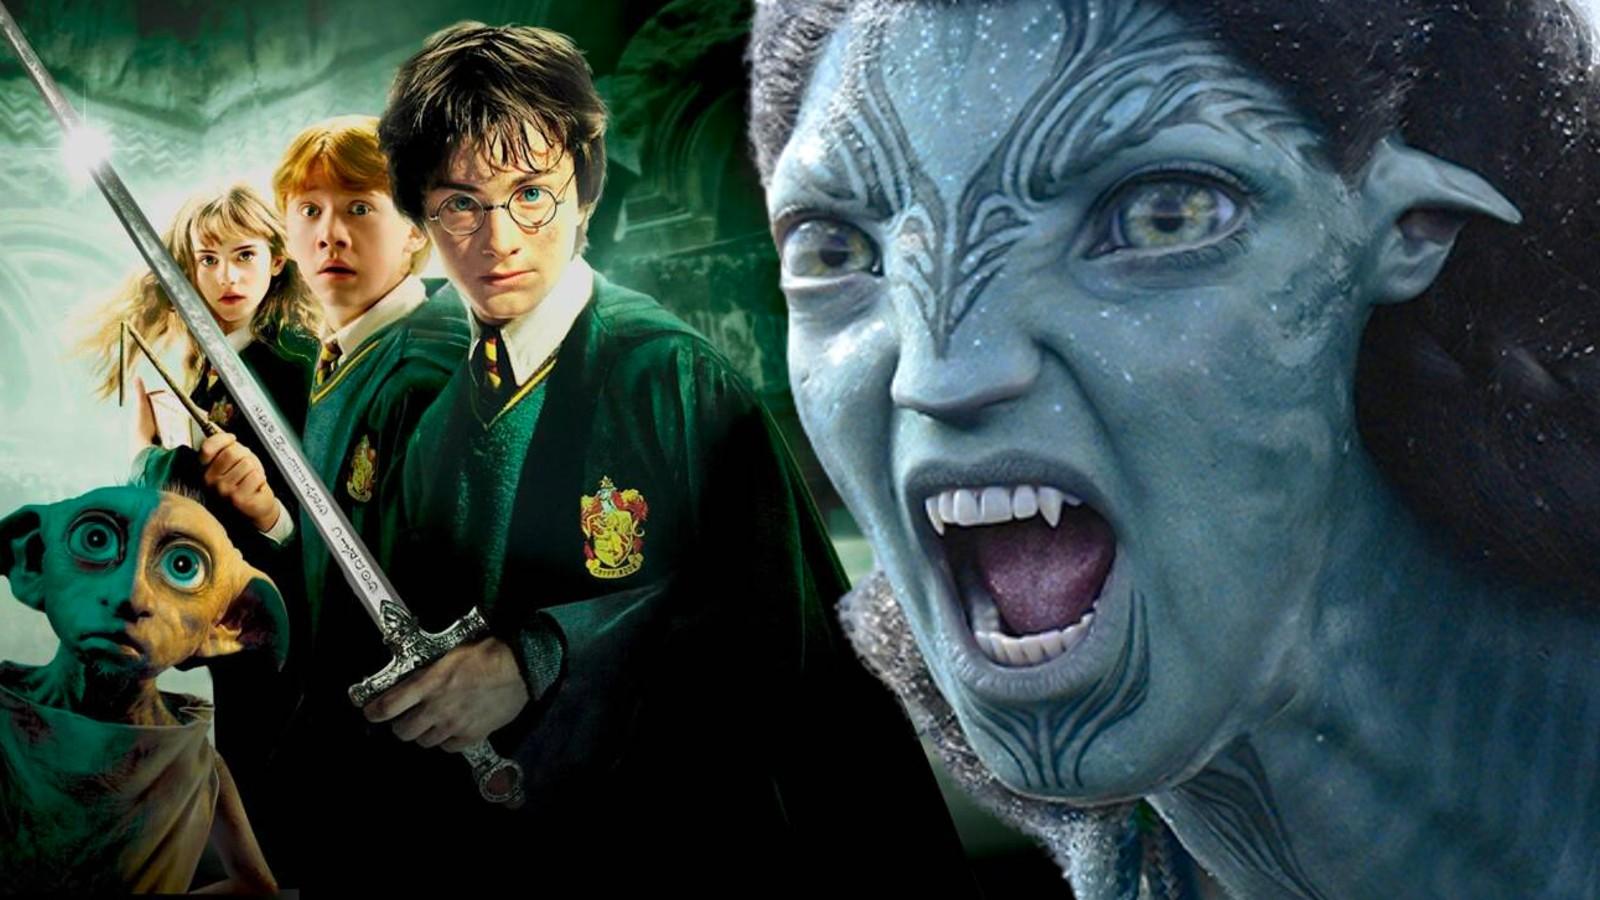 Stills from Harry Potter and the Chamber of Secrets and Avatar 2, two of the longest movies ever made